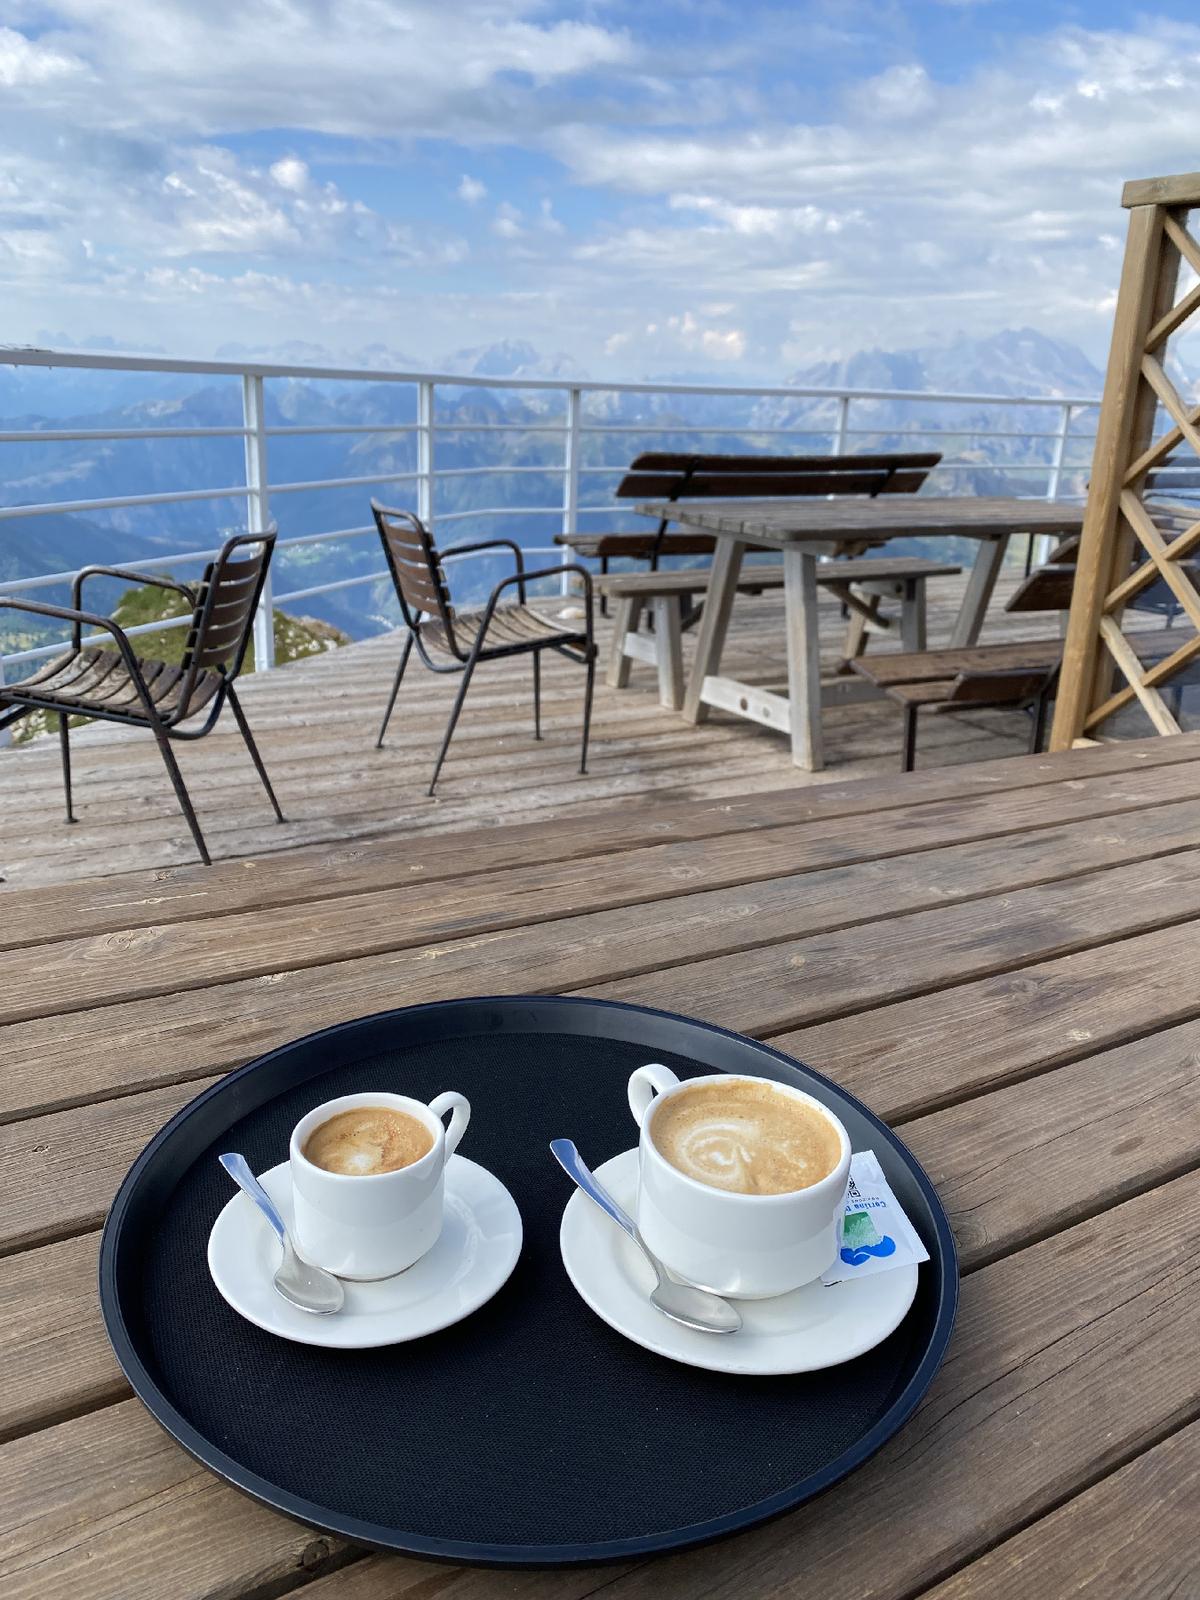 In Italy’s Dolomite Mountains, it is possible to have coffee on top of the world. (Courtesy of Margot Black)